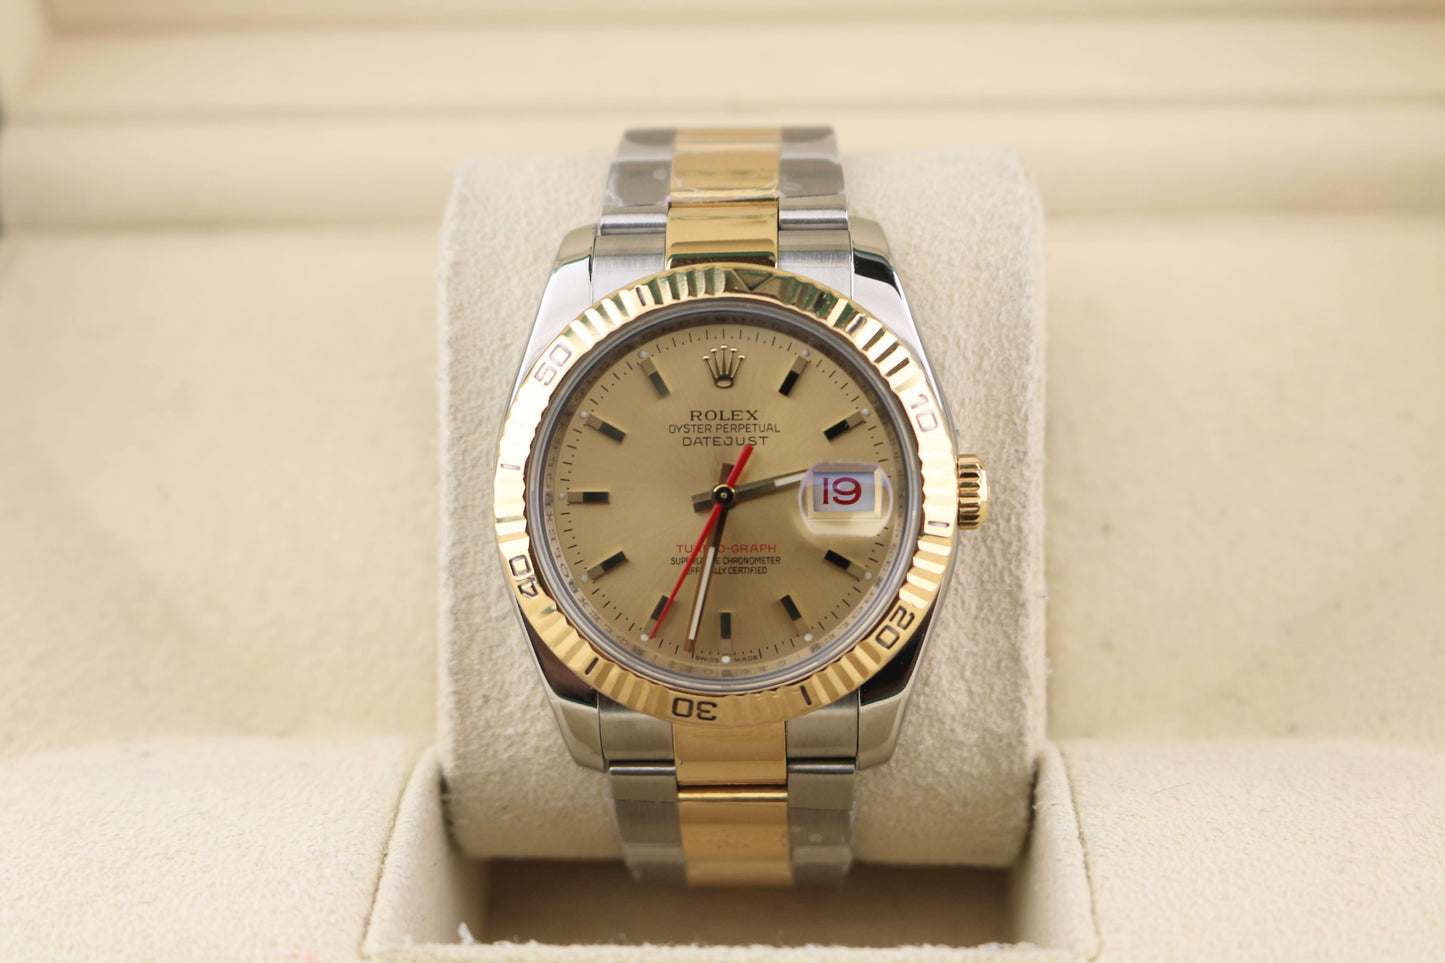 2006 Rolex Datejust Turn-O-Graph 116263 Champagne Dial TT Oyster No Papers 36mm